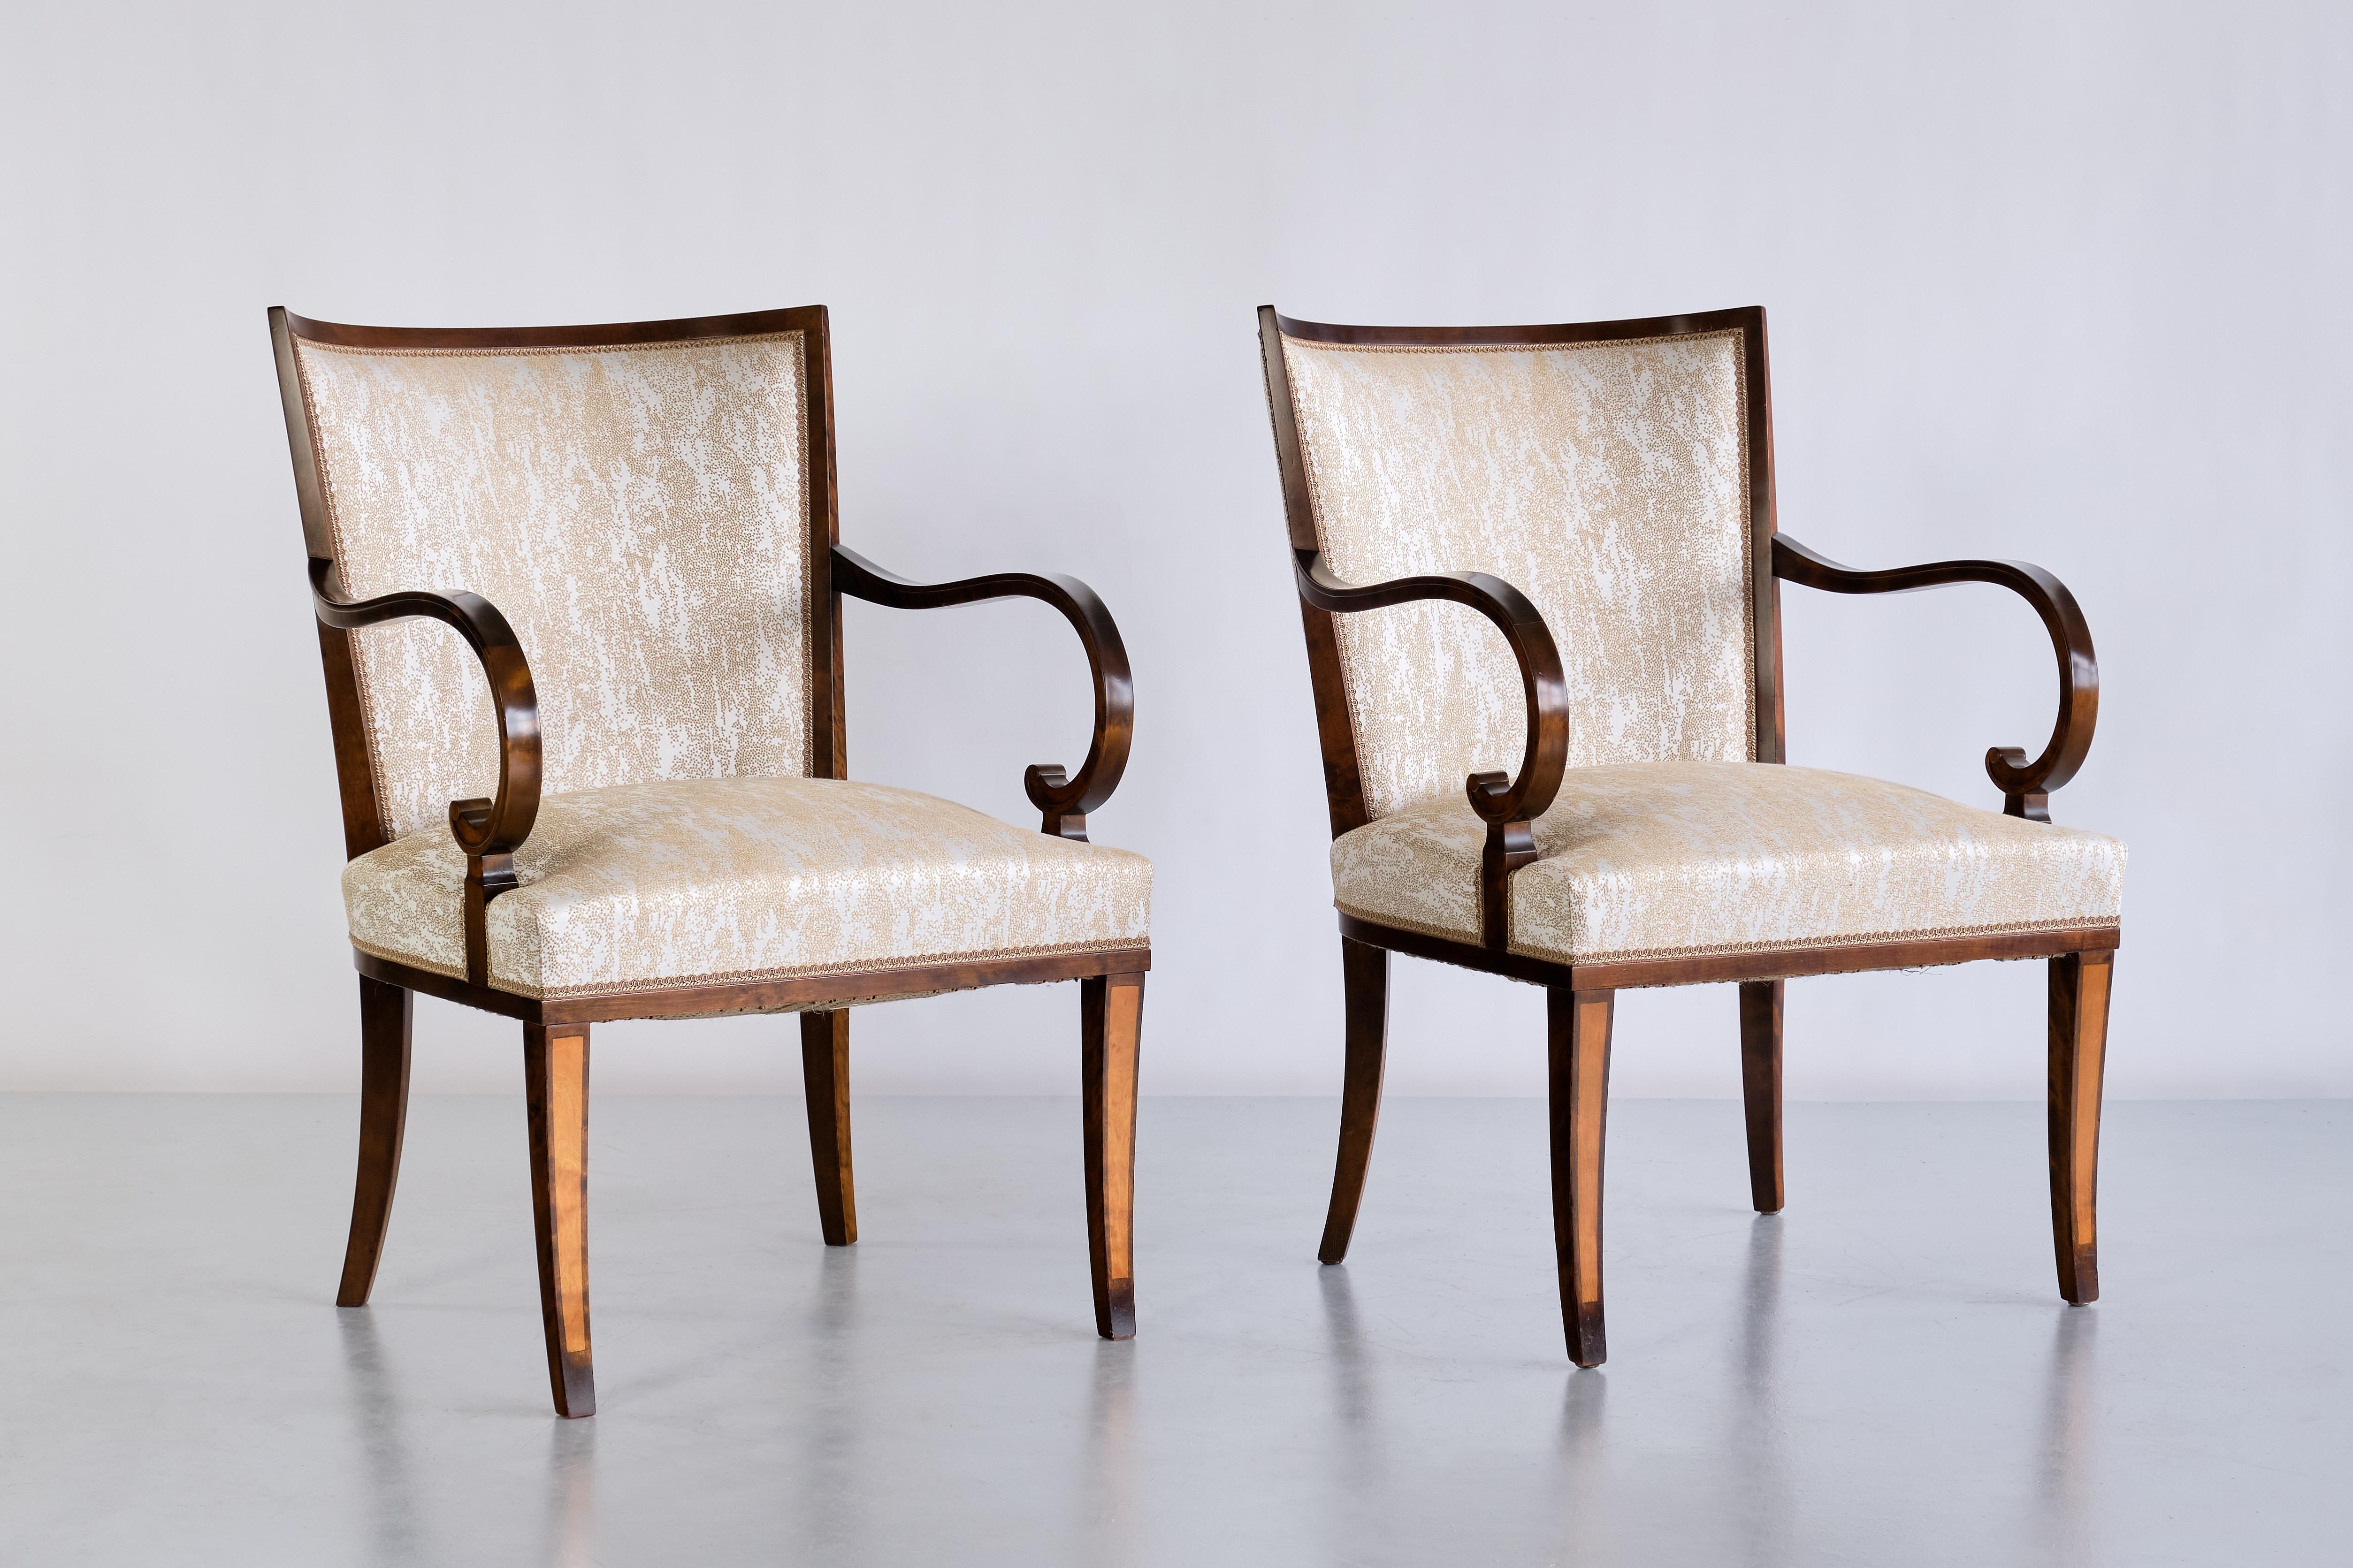 This exceptionally rare pair of armchairs was designed by Carl Malmsten and produced by Svenska Möbelfabriken in Bodafors, Sweden in the early 1930s. The refined design is marked by its frame with a beautifully curved backrest and saber legs. The